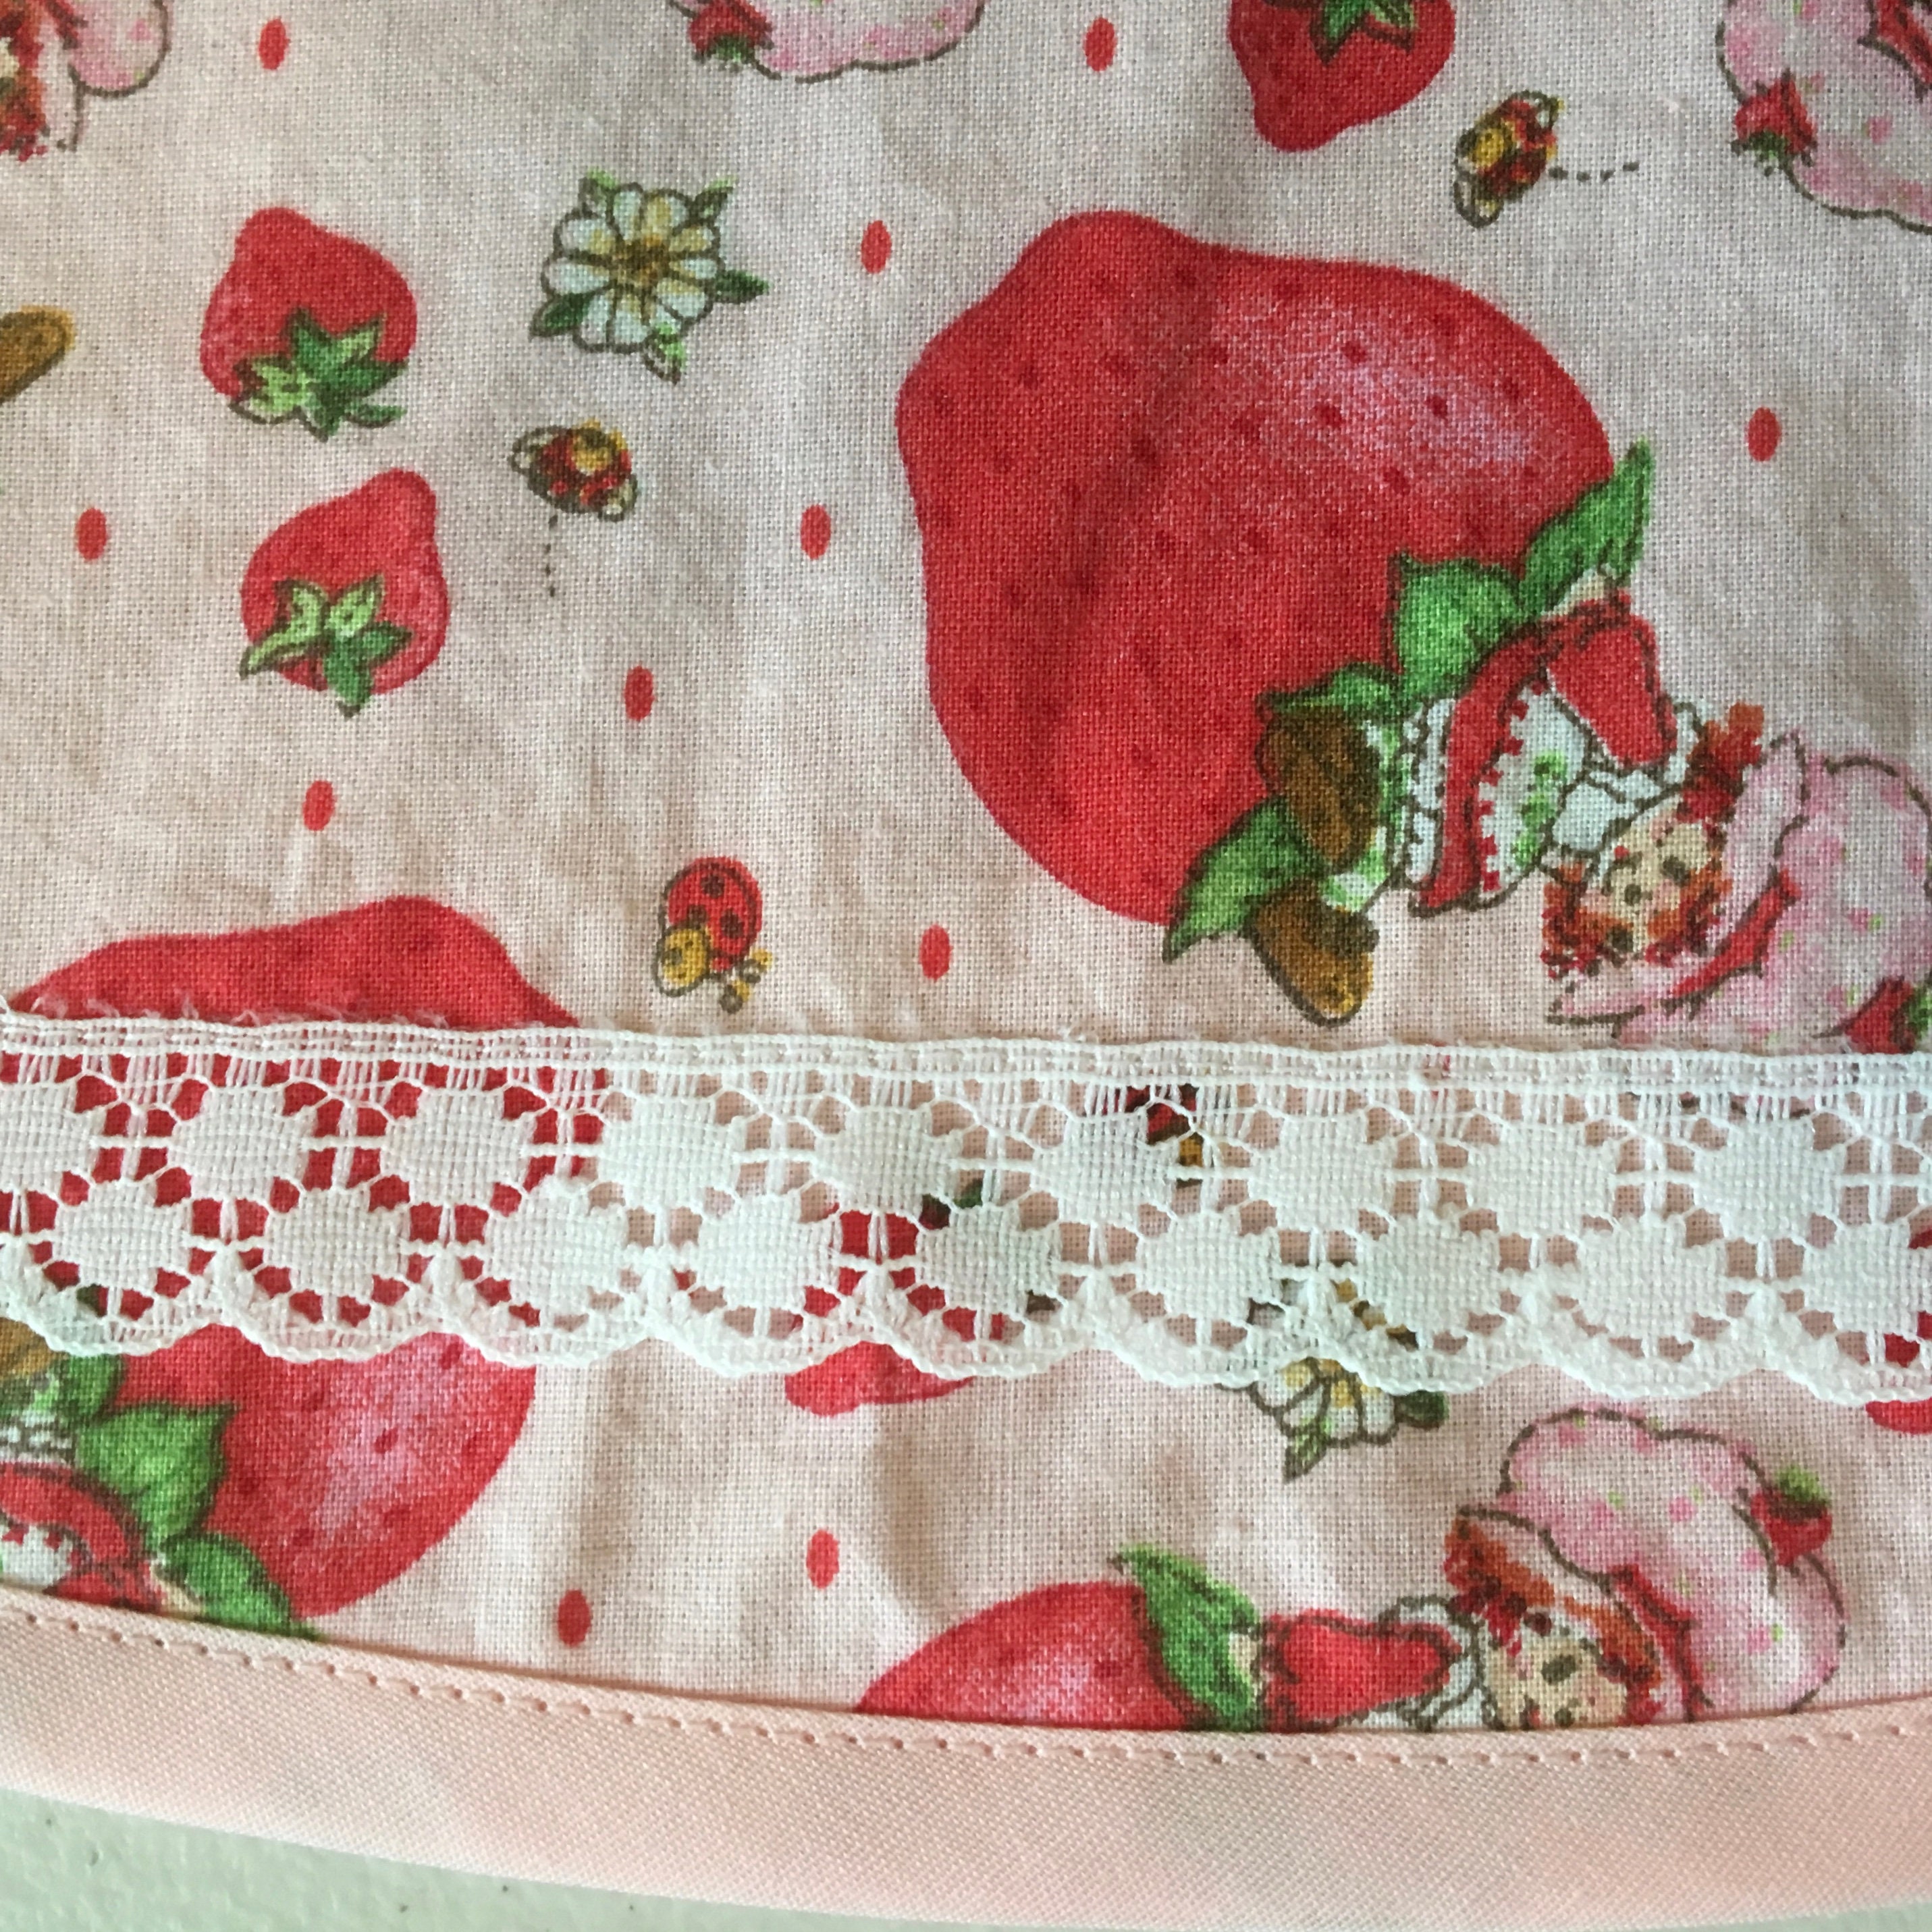 Girl's Apron from Vintage Strawberry Shortcake Fabric / Girl's Apron ...